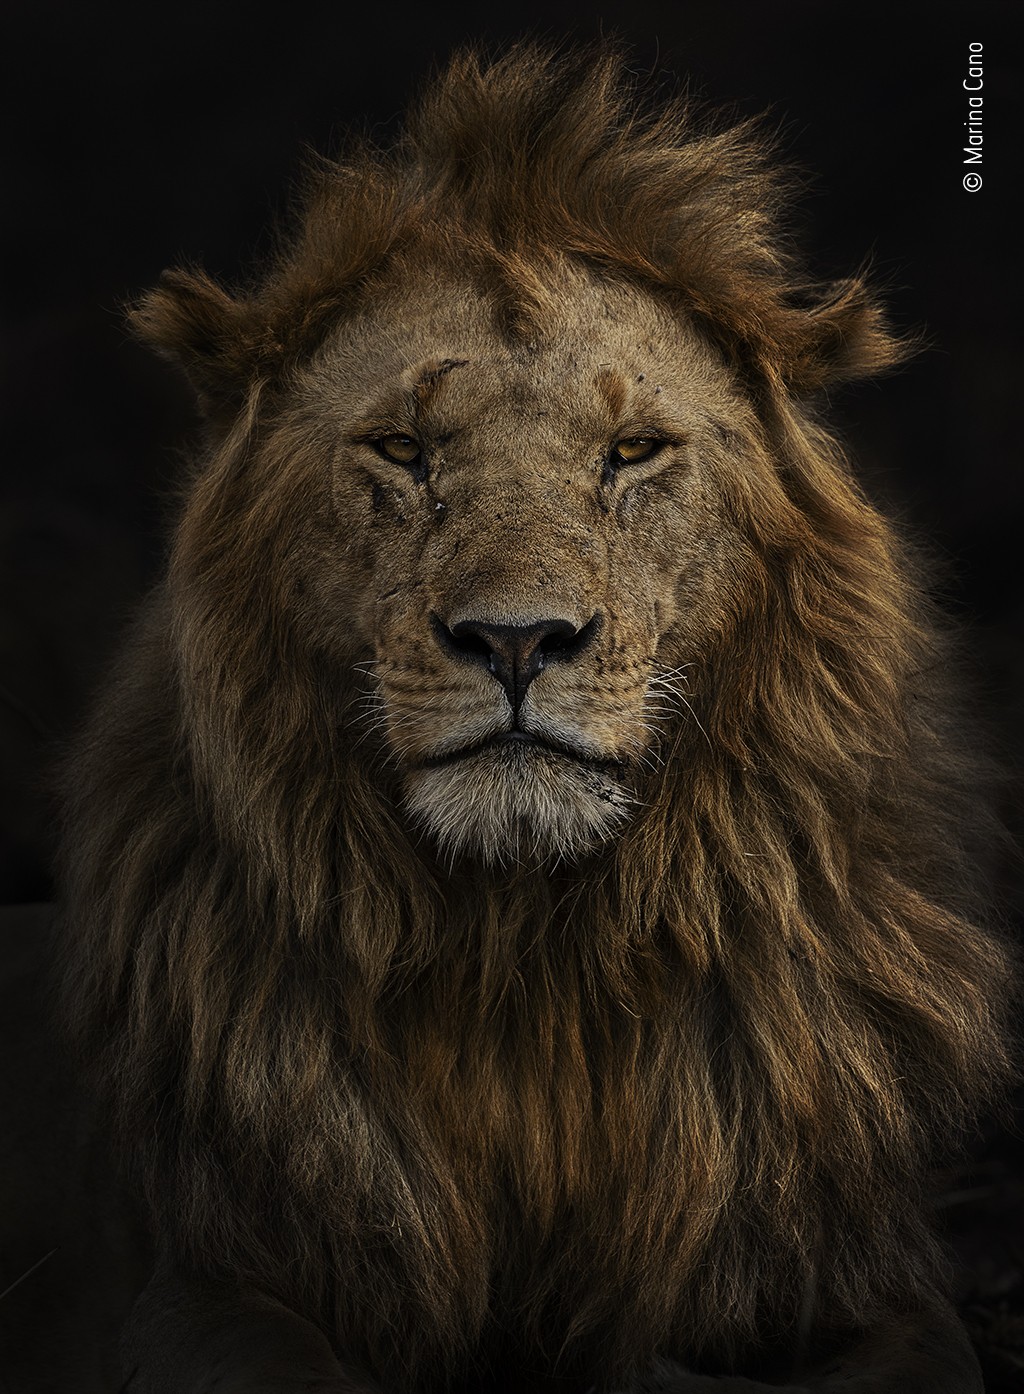 A portrait of Olobor, a male lion from Kenya.